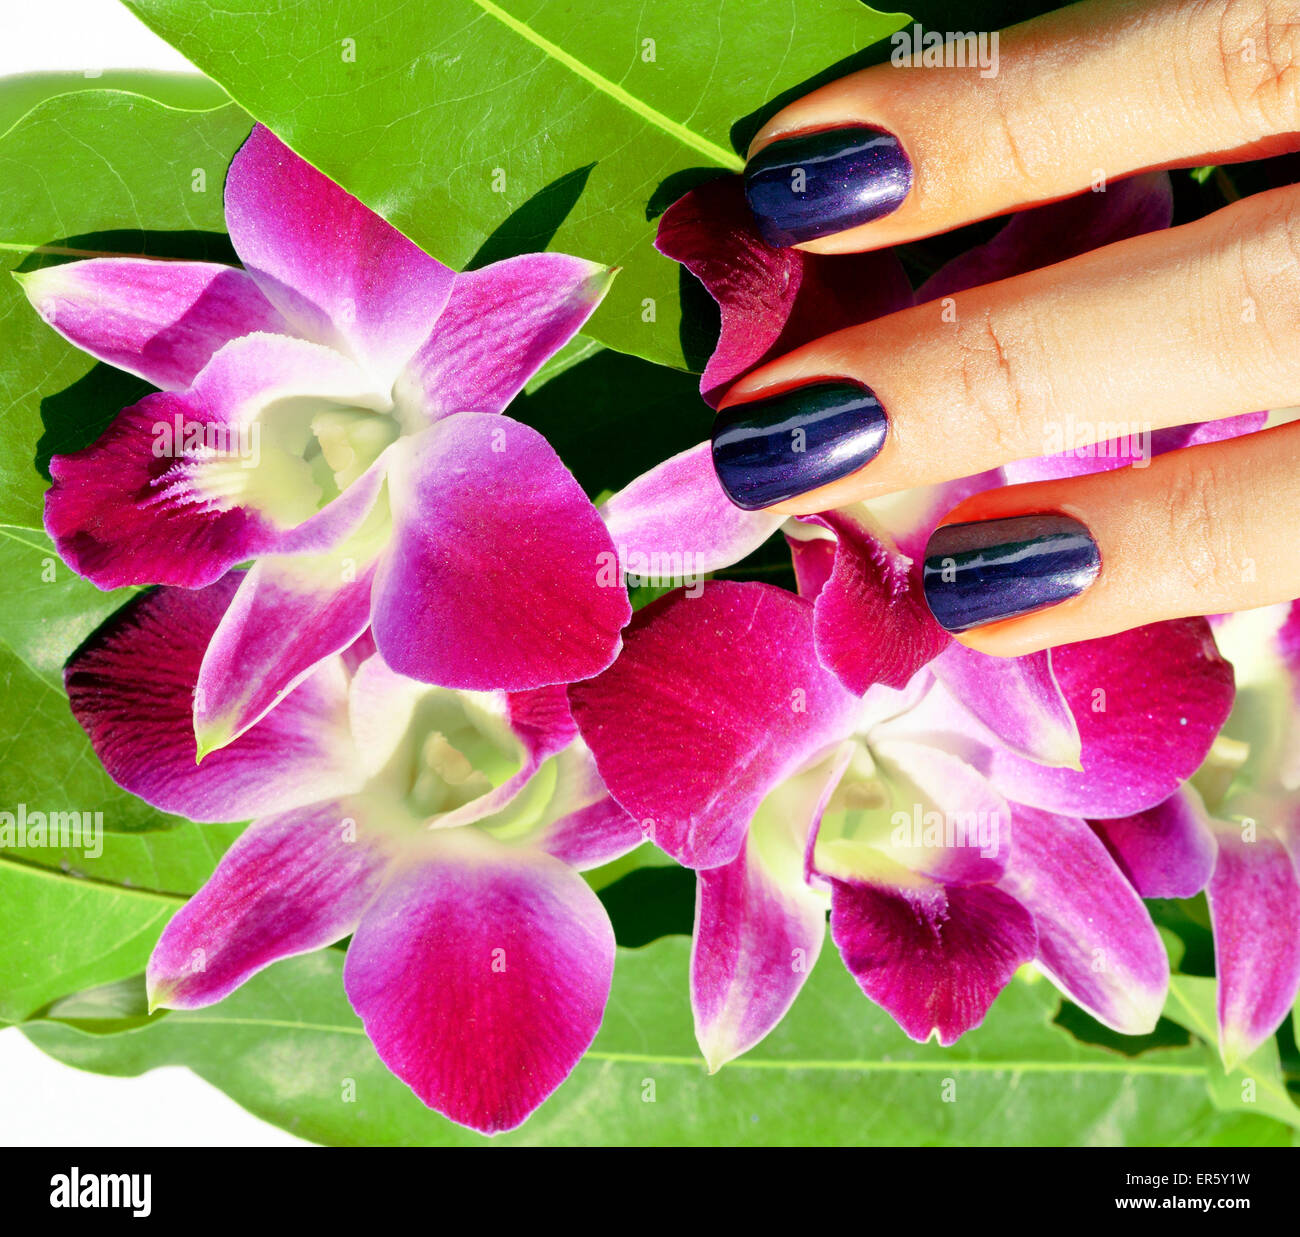 bright colored photo of fingernails with manicure and orchids ma Stock Photo